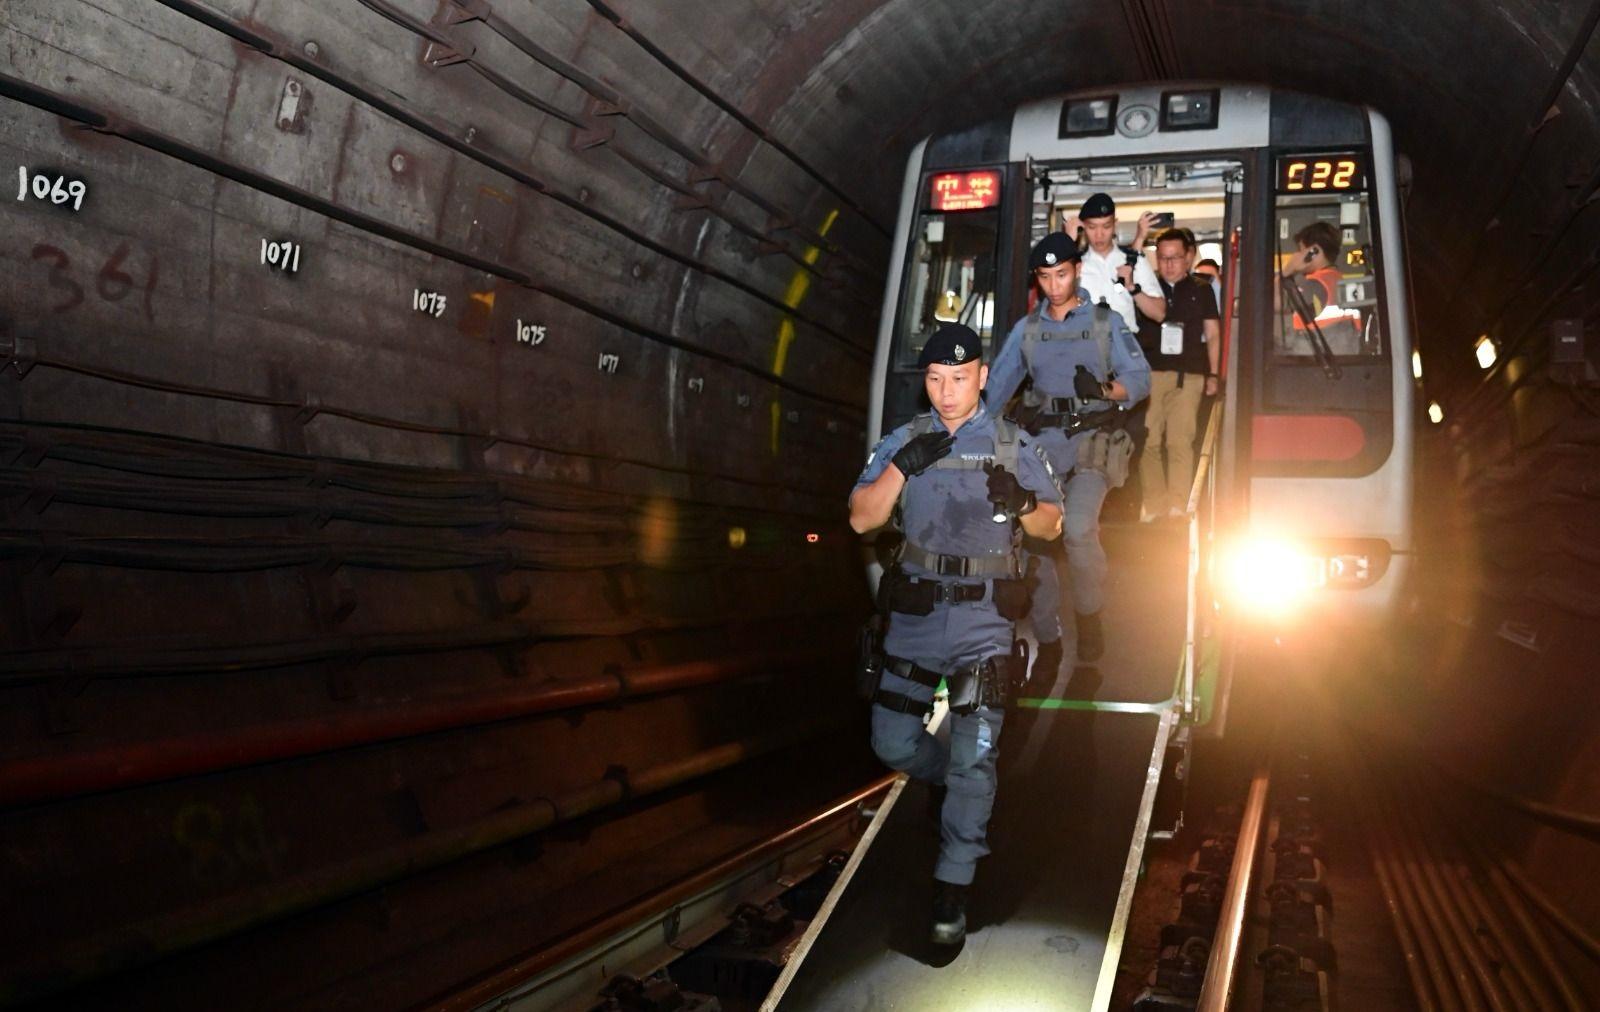 The Hong Kong Police Force, together with the MTR Corporation, the Fire Services Department, the Auxiliary Medical Service, St John Ambulance conducted an inter-departmental response exercise in the early hours today (October 14). Picture shows officers enter the tunnel for initial investigations and search for casualties.